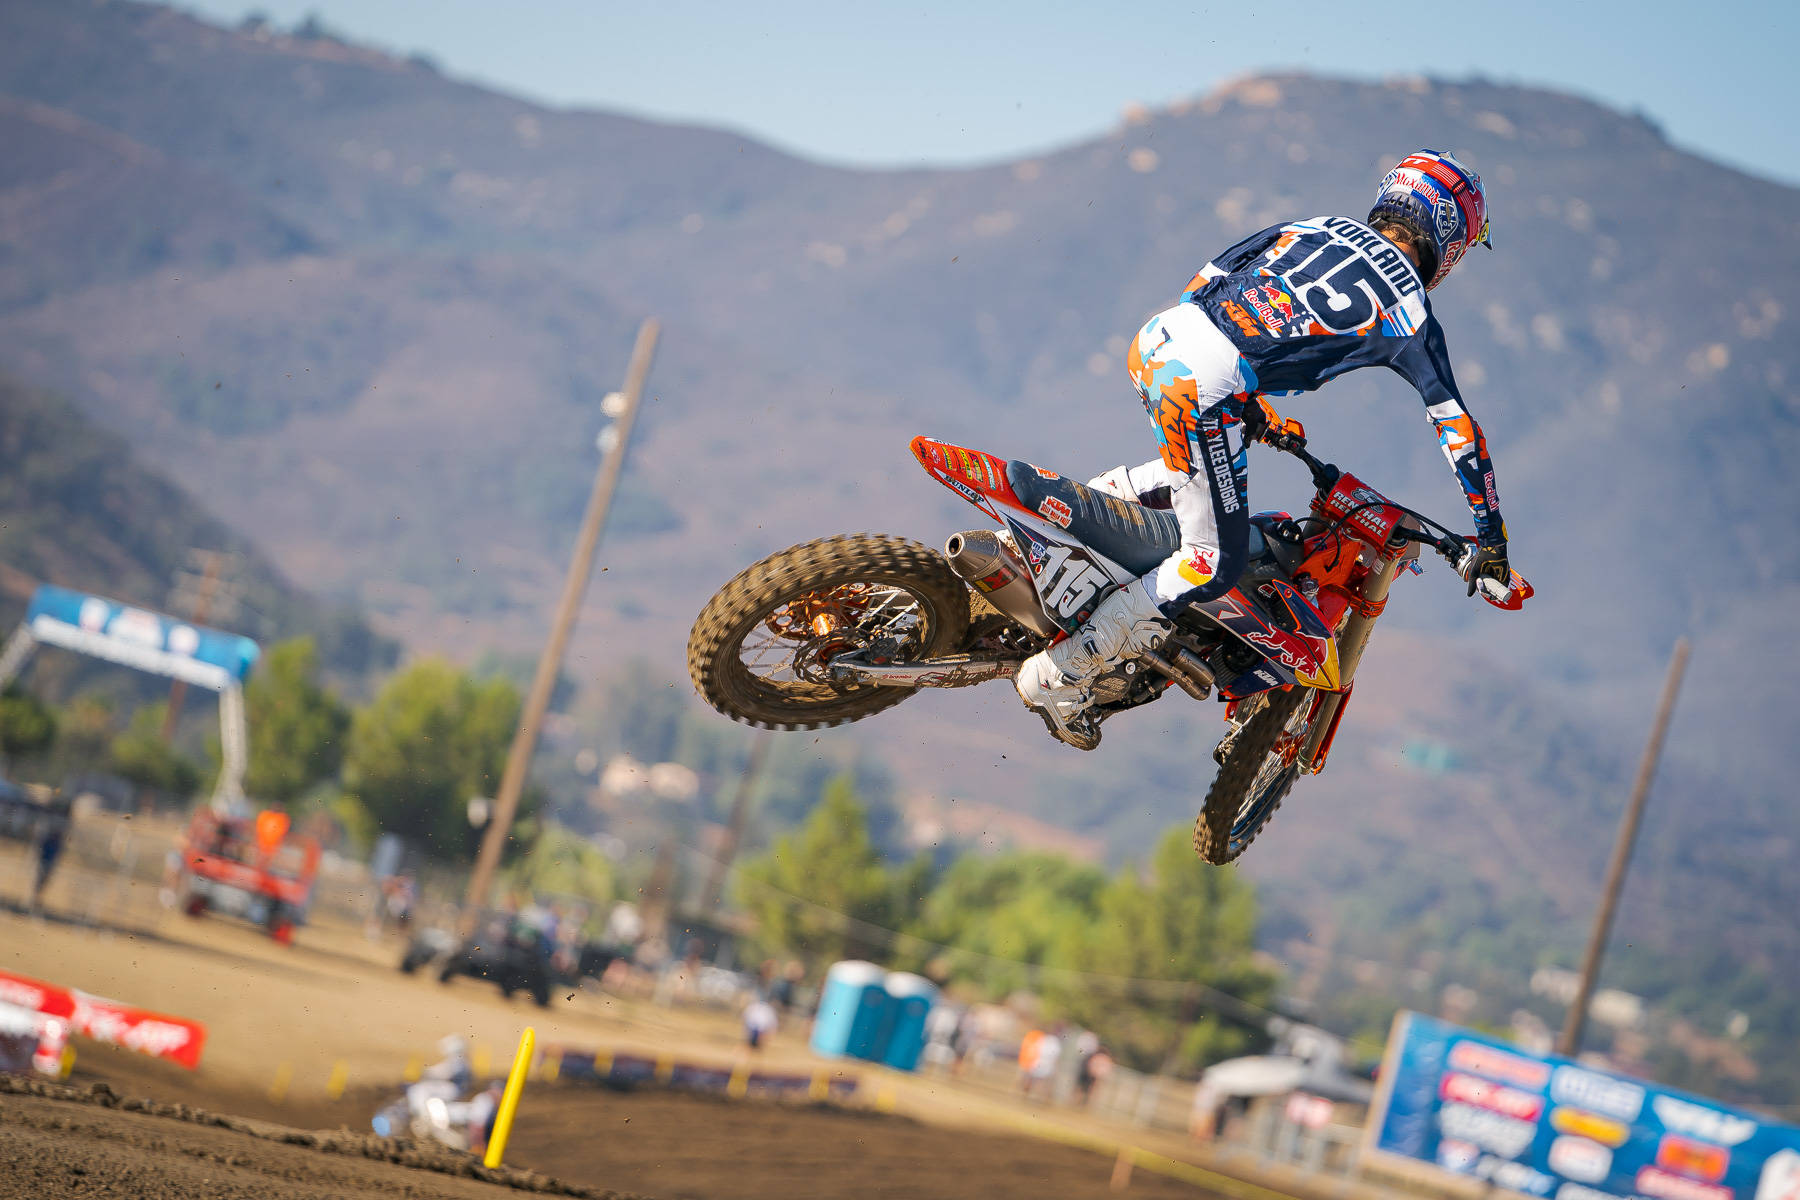 2021 Hangtown Motocross Provisional Entry List and Injury Report